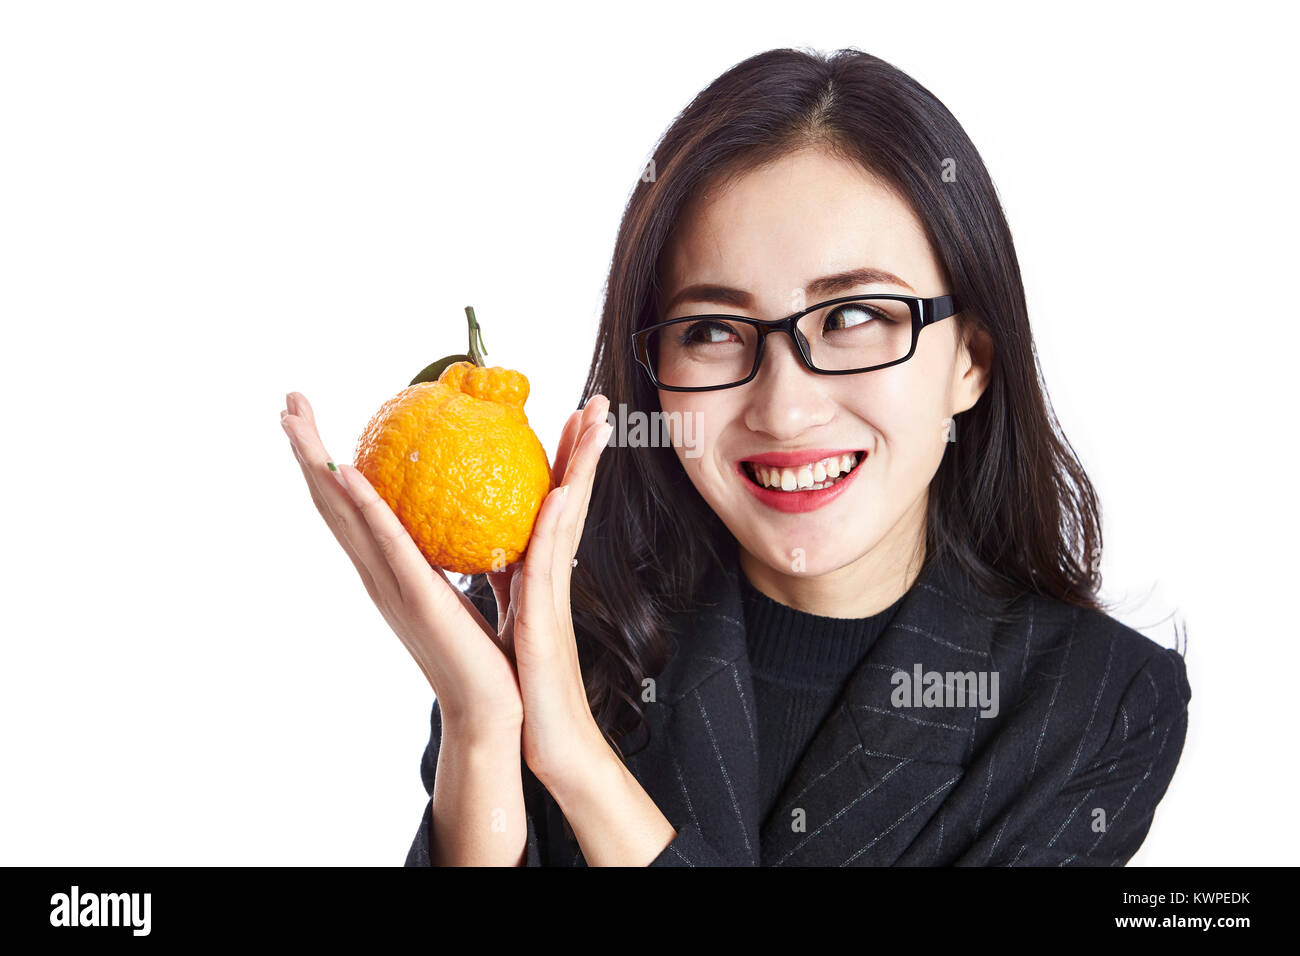 studio shot of a young asian business woman holding an ugli fruit, making a face, happy and smiling, isolated on white background. Stock Photo